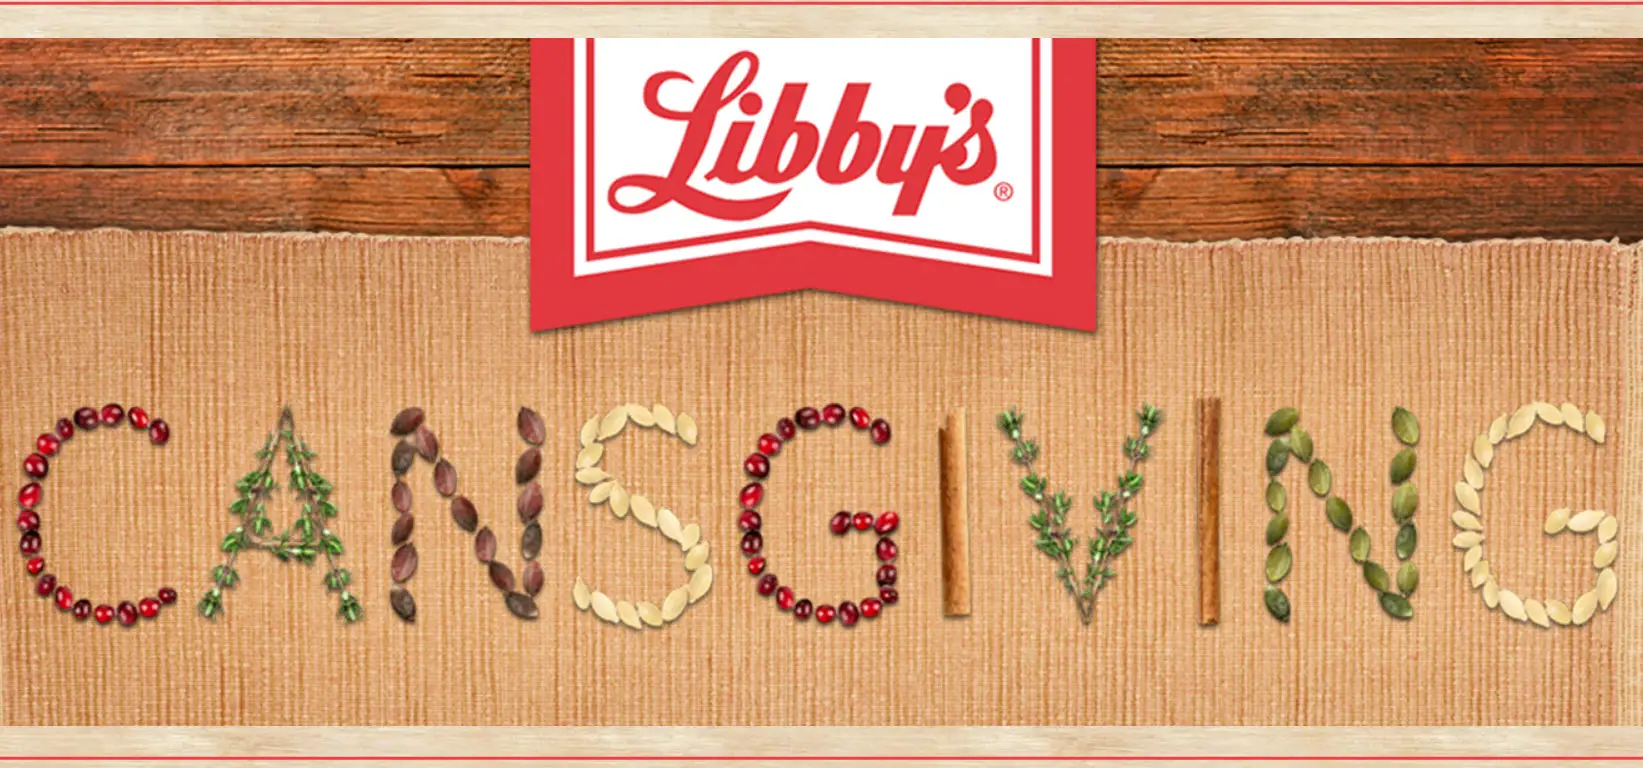 Enter for your chance to win $1,250 and Give Thanks with Libby's Cansgiving Sweepstakes! Thanksgiving isn't just about food and family fun – it's also about giving back. In honor of the season, Libby’s® is proud to support Feeding America local food banks, the largest domestic hunger-relief organization that secures and distributes 4.3 billion meals each year.